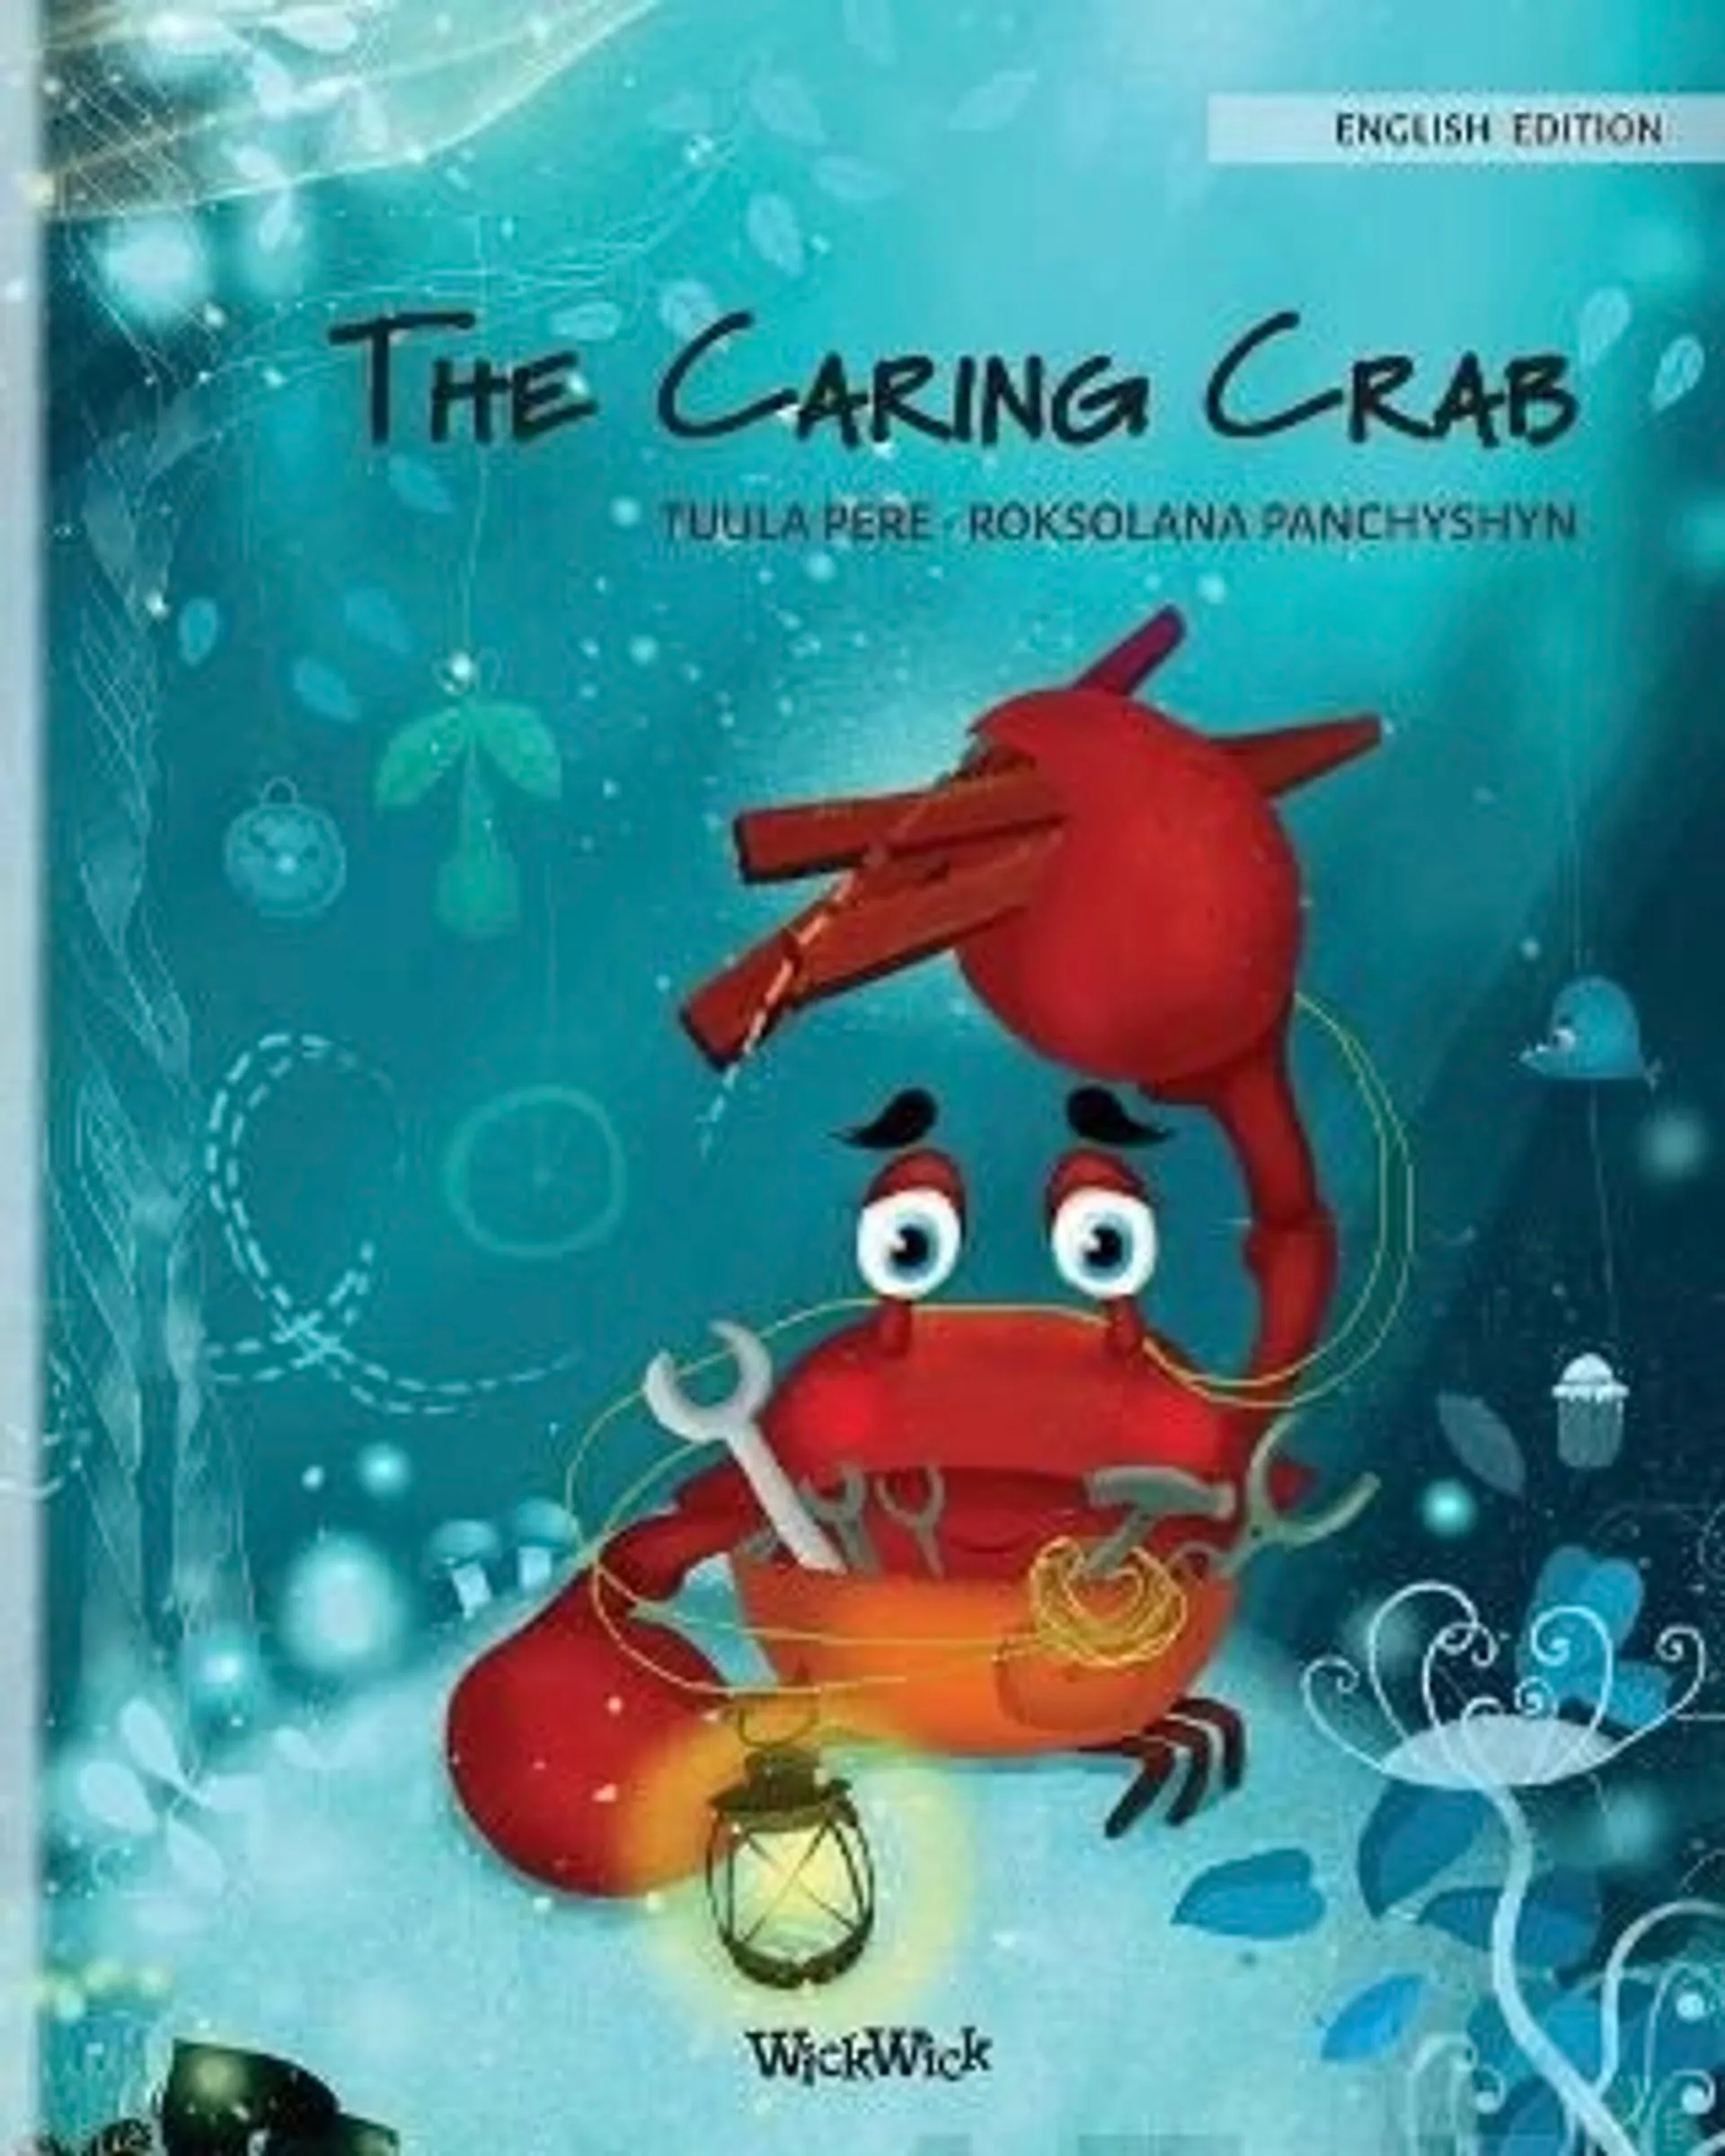 Pere, The Caring Crab